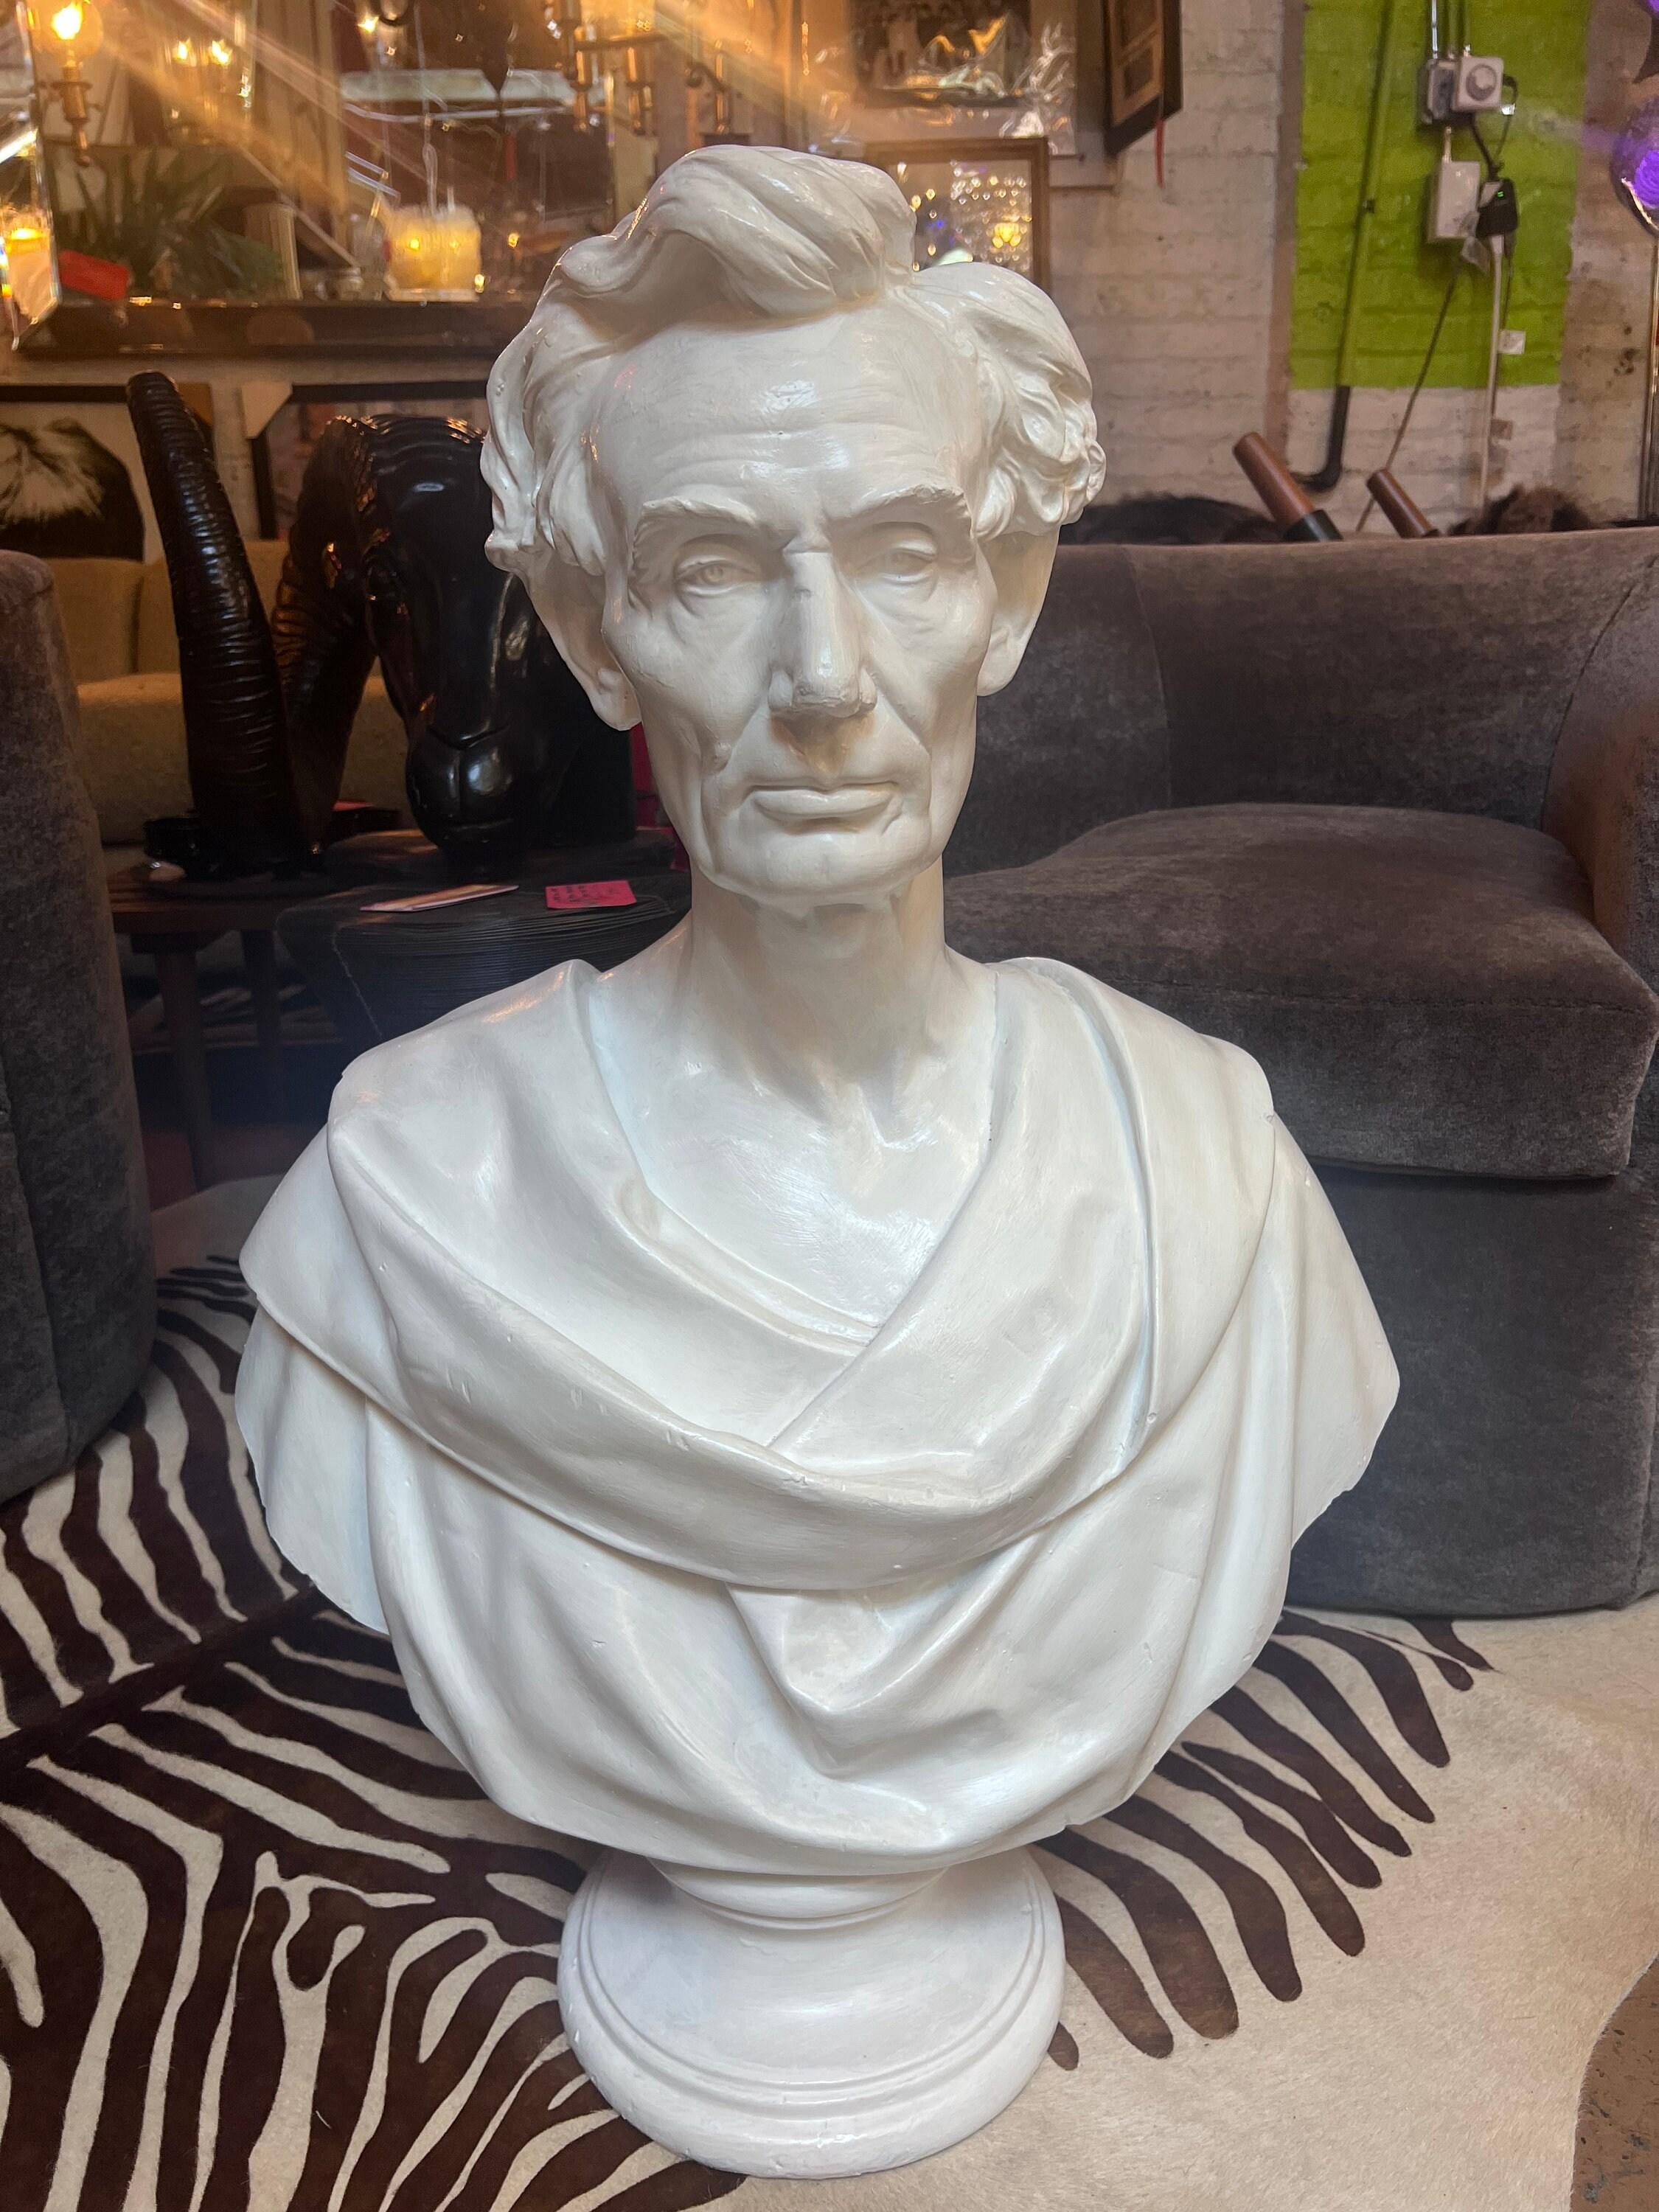 Leonard W. Volk Plaster Bust of Abraham Lincoln

The Leonard W. Volk Plaster Bust of Abraham Lincoln is a remarkable 19th-century piece of art. Crafted from white plaster, the bust depicts Abraham Lincoln in a style reminiscent of ancient Rome,